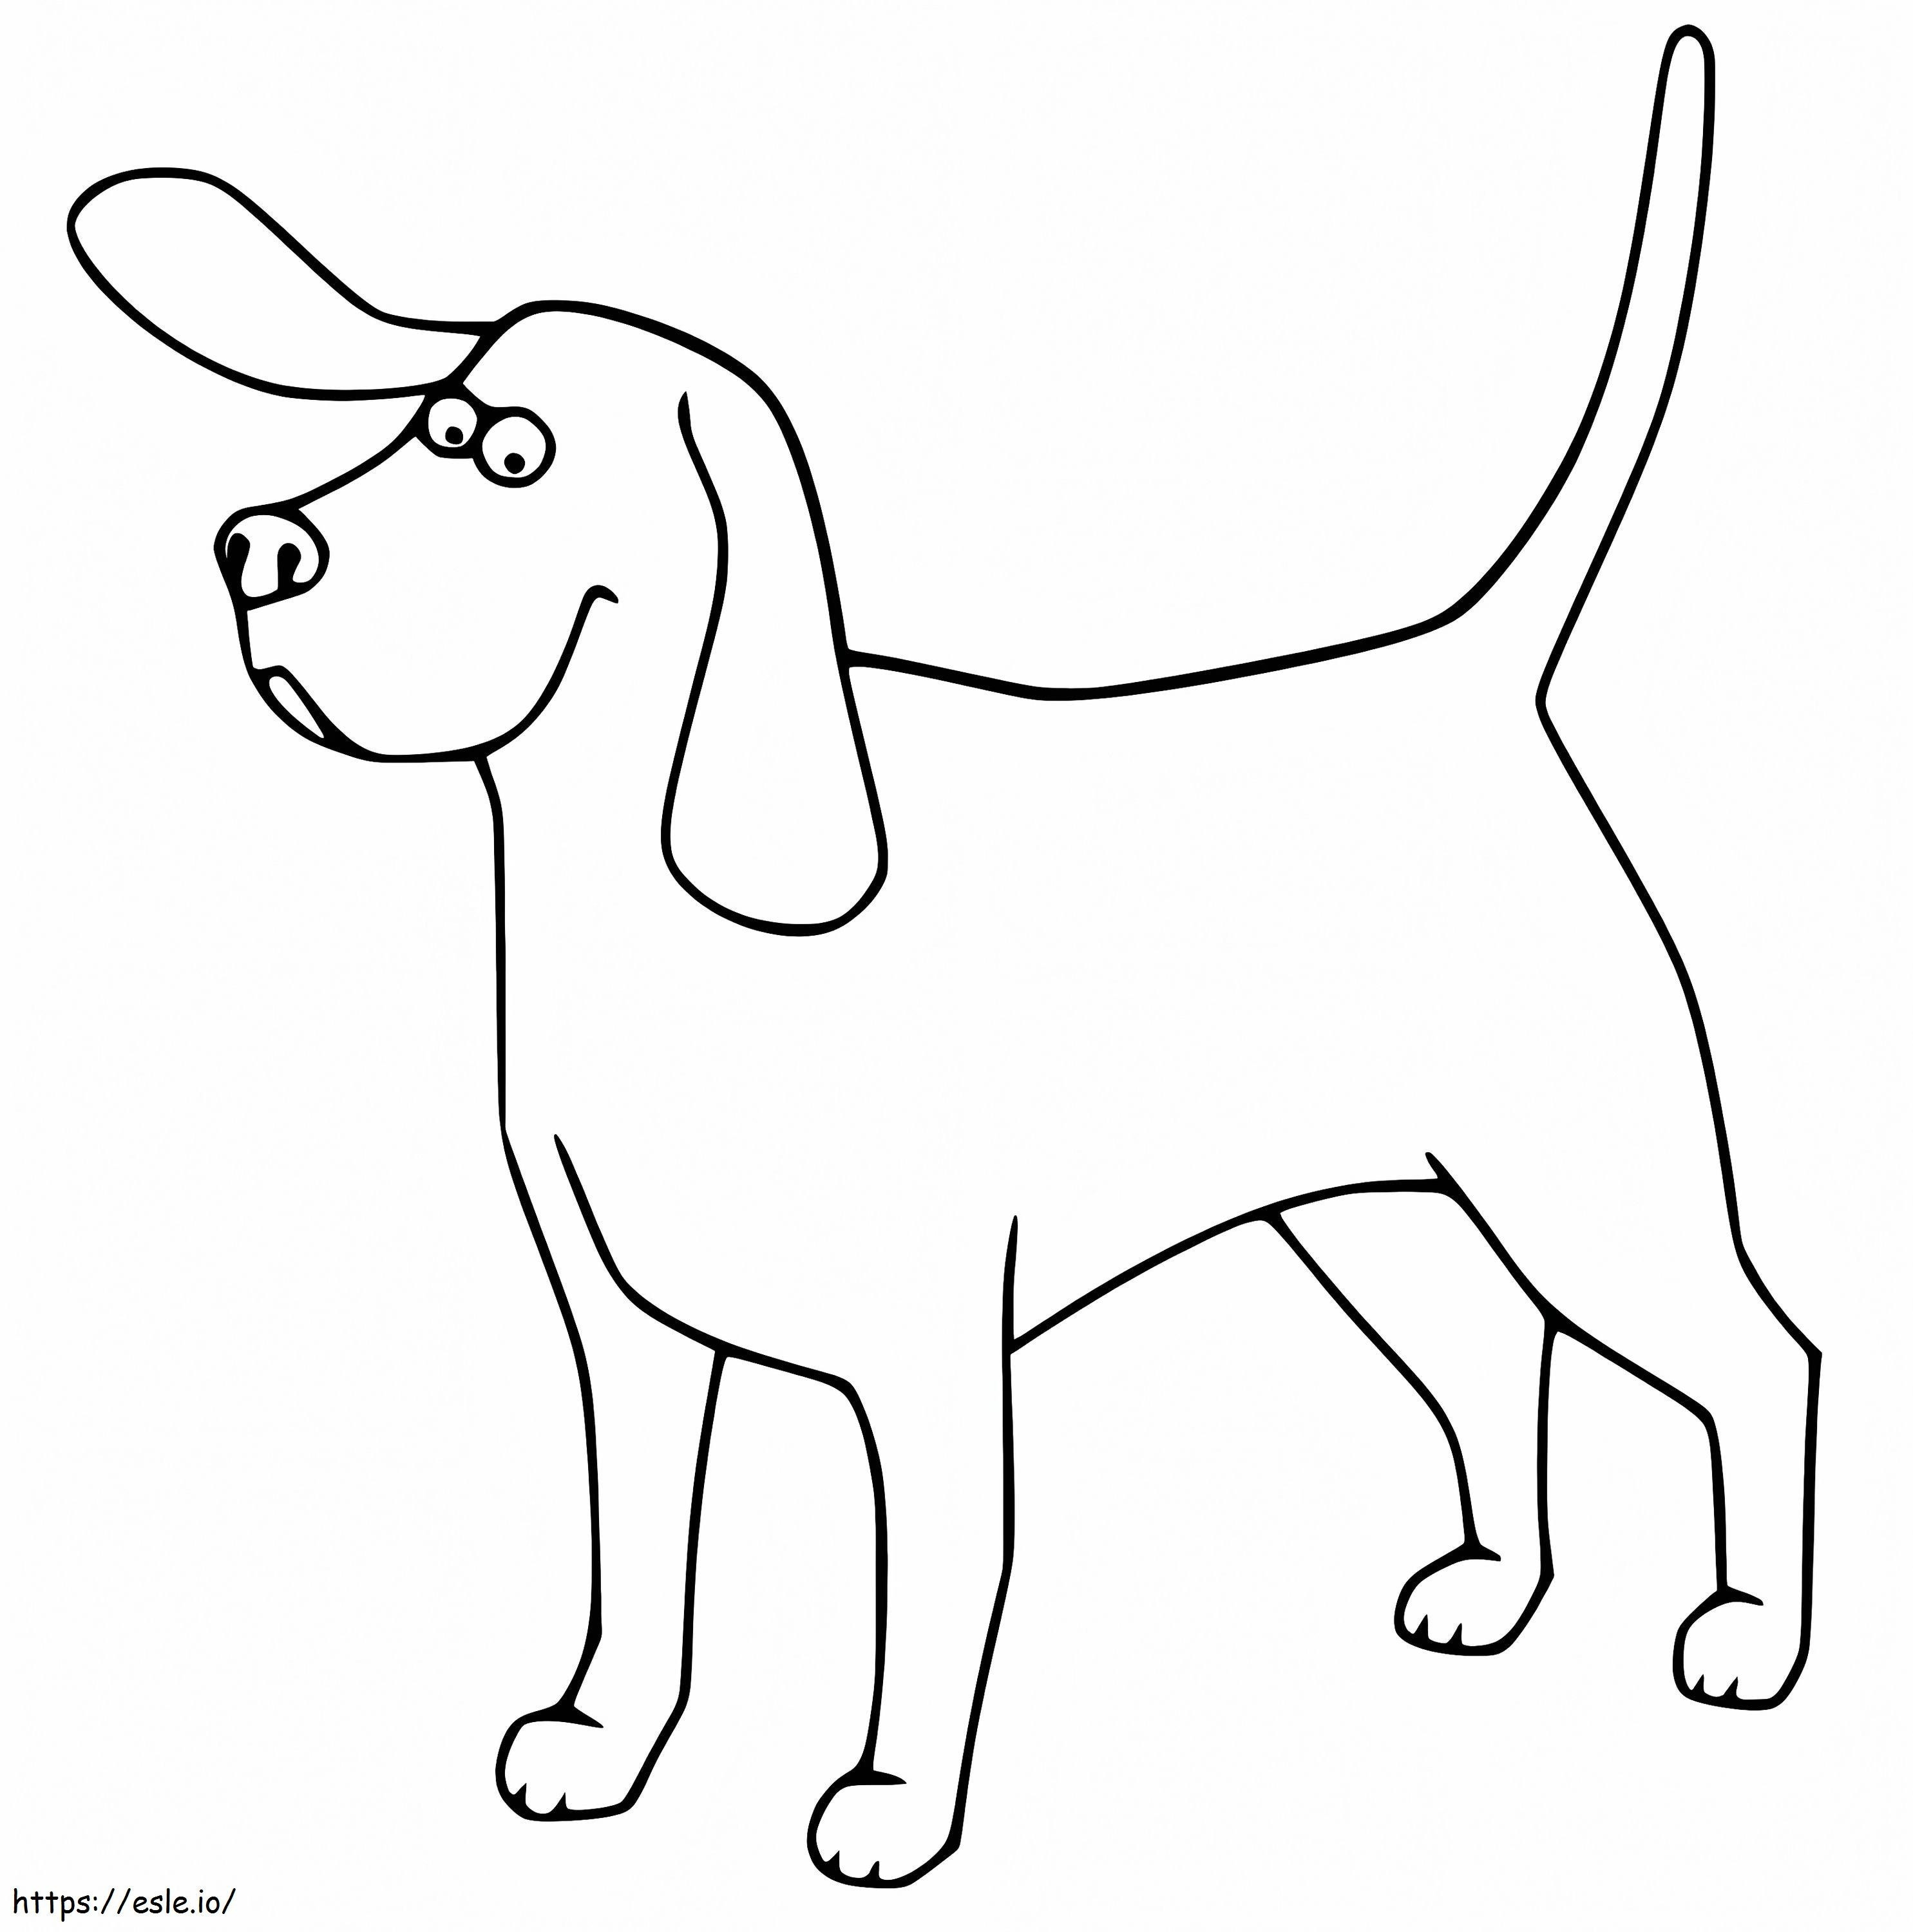 Funny Beagle Dog coloring page